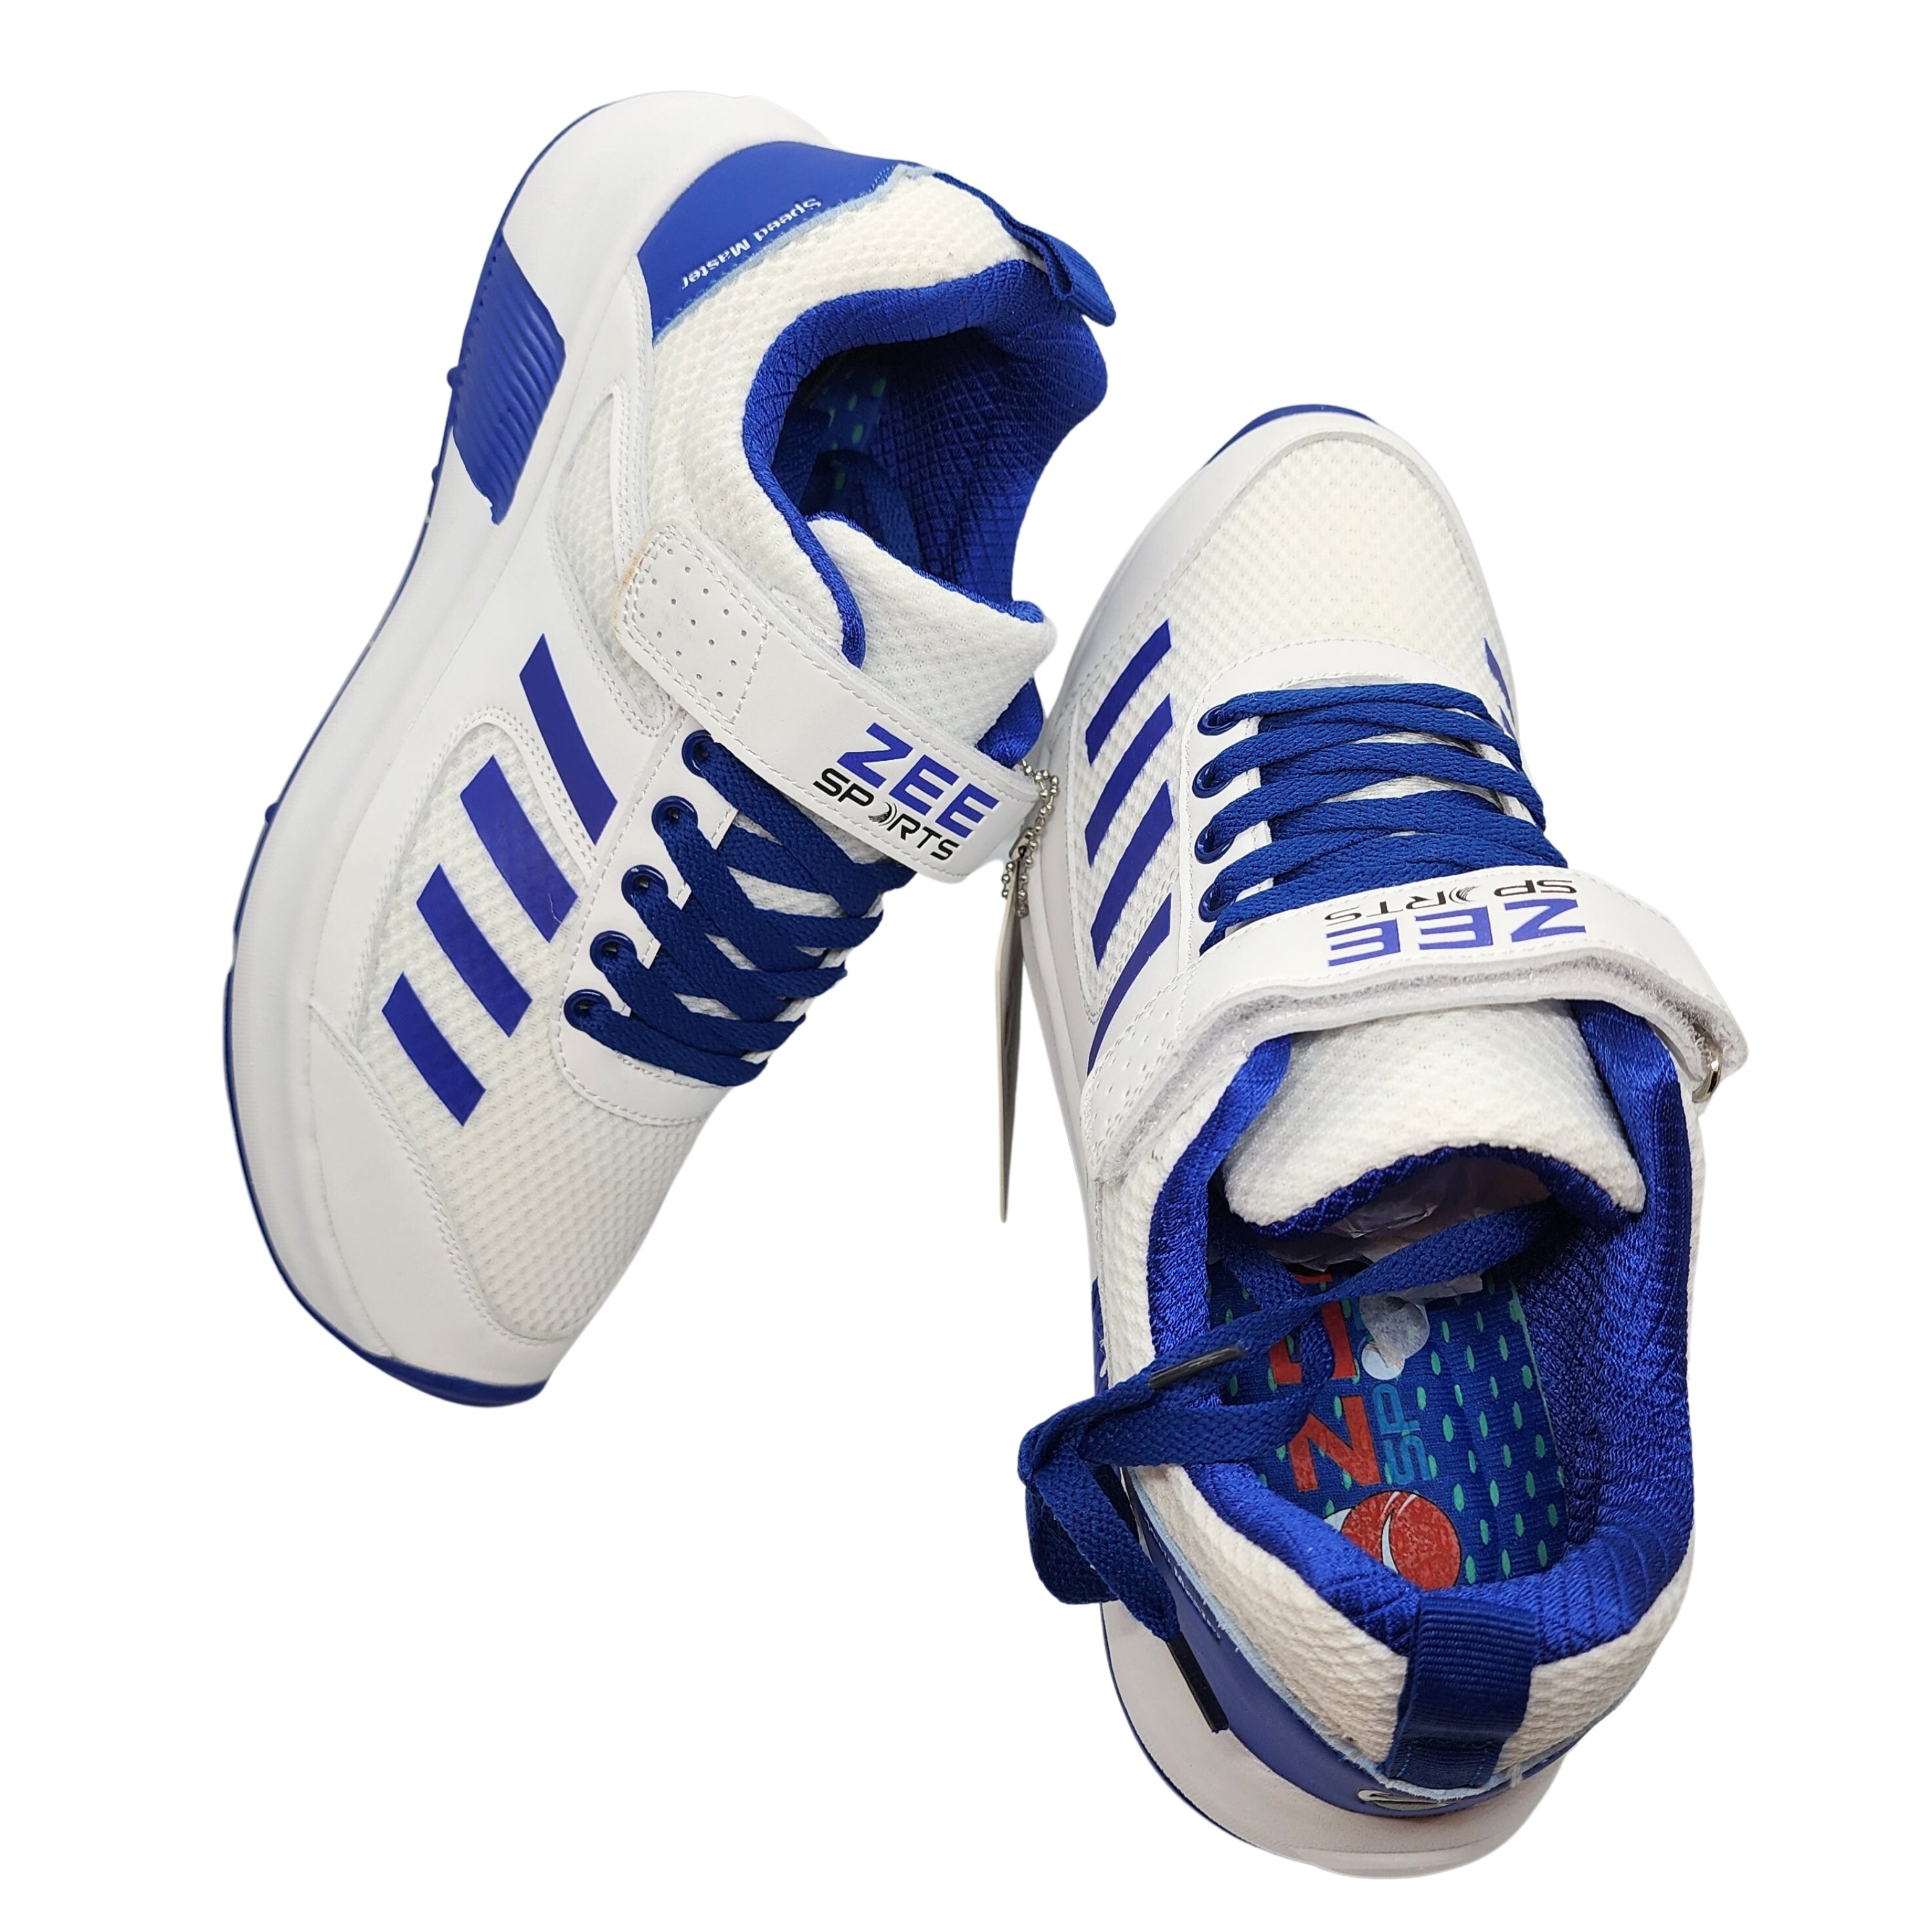 Zee Sports Allrounder Rubber Spikes Cricket Shoes W Additional Gel Non Slip Insoles